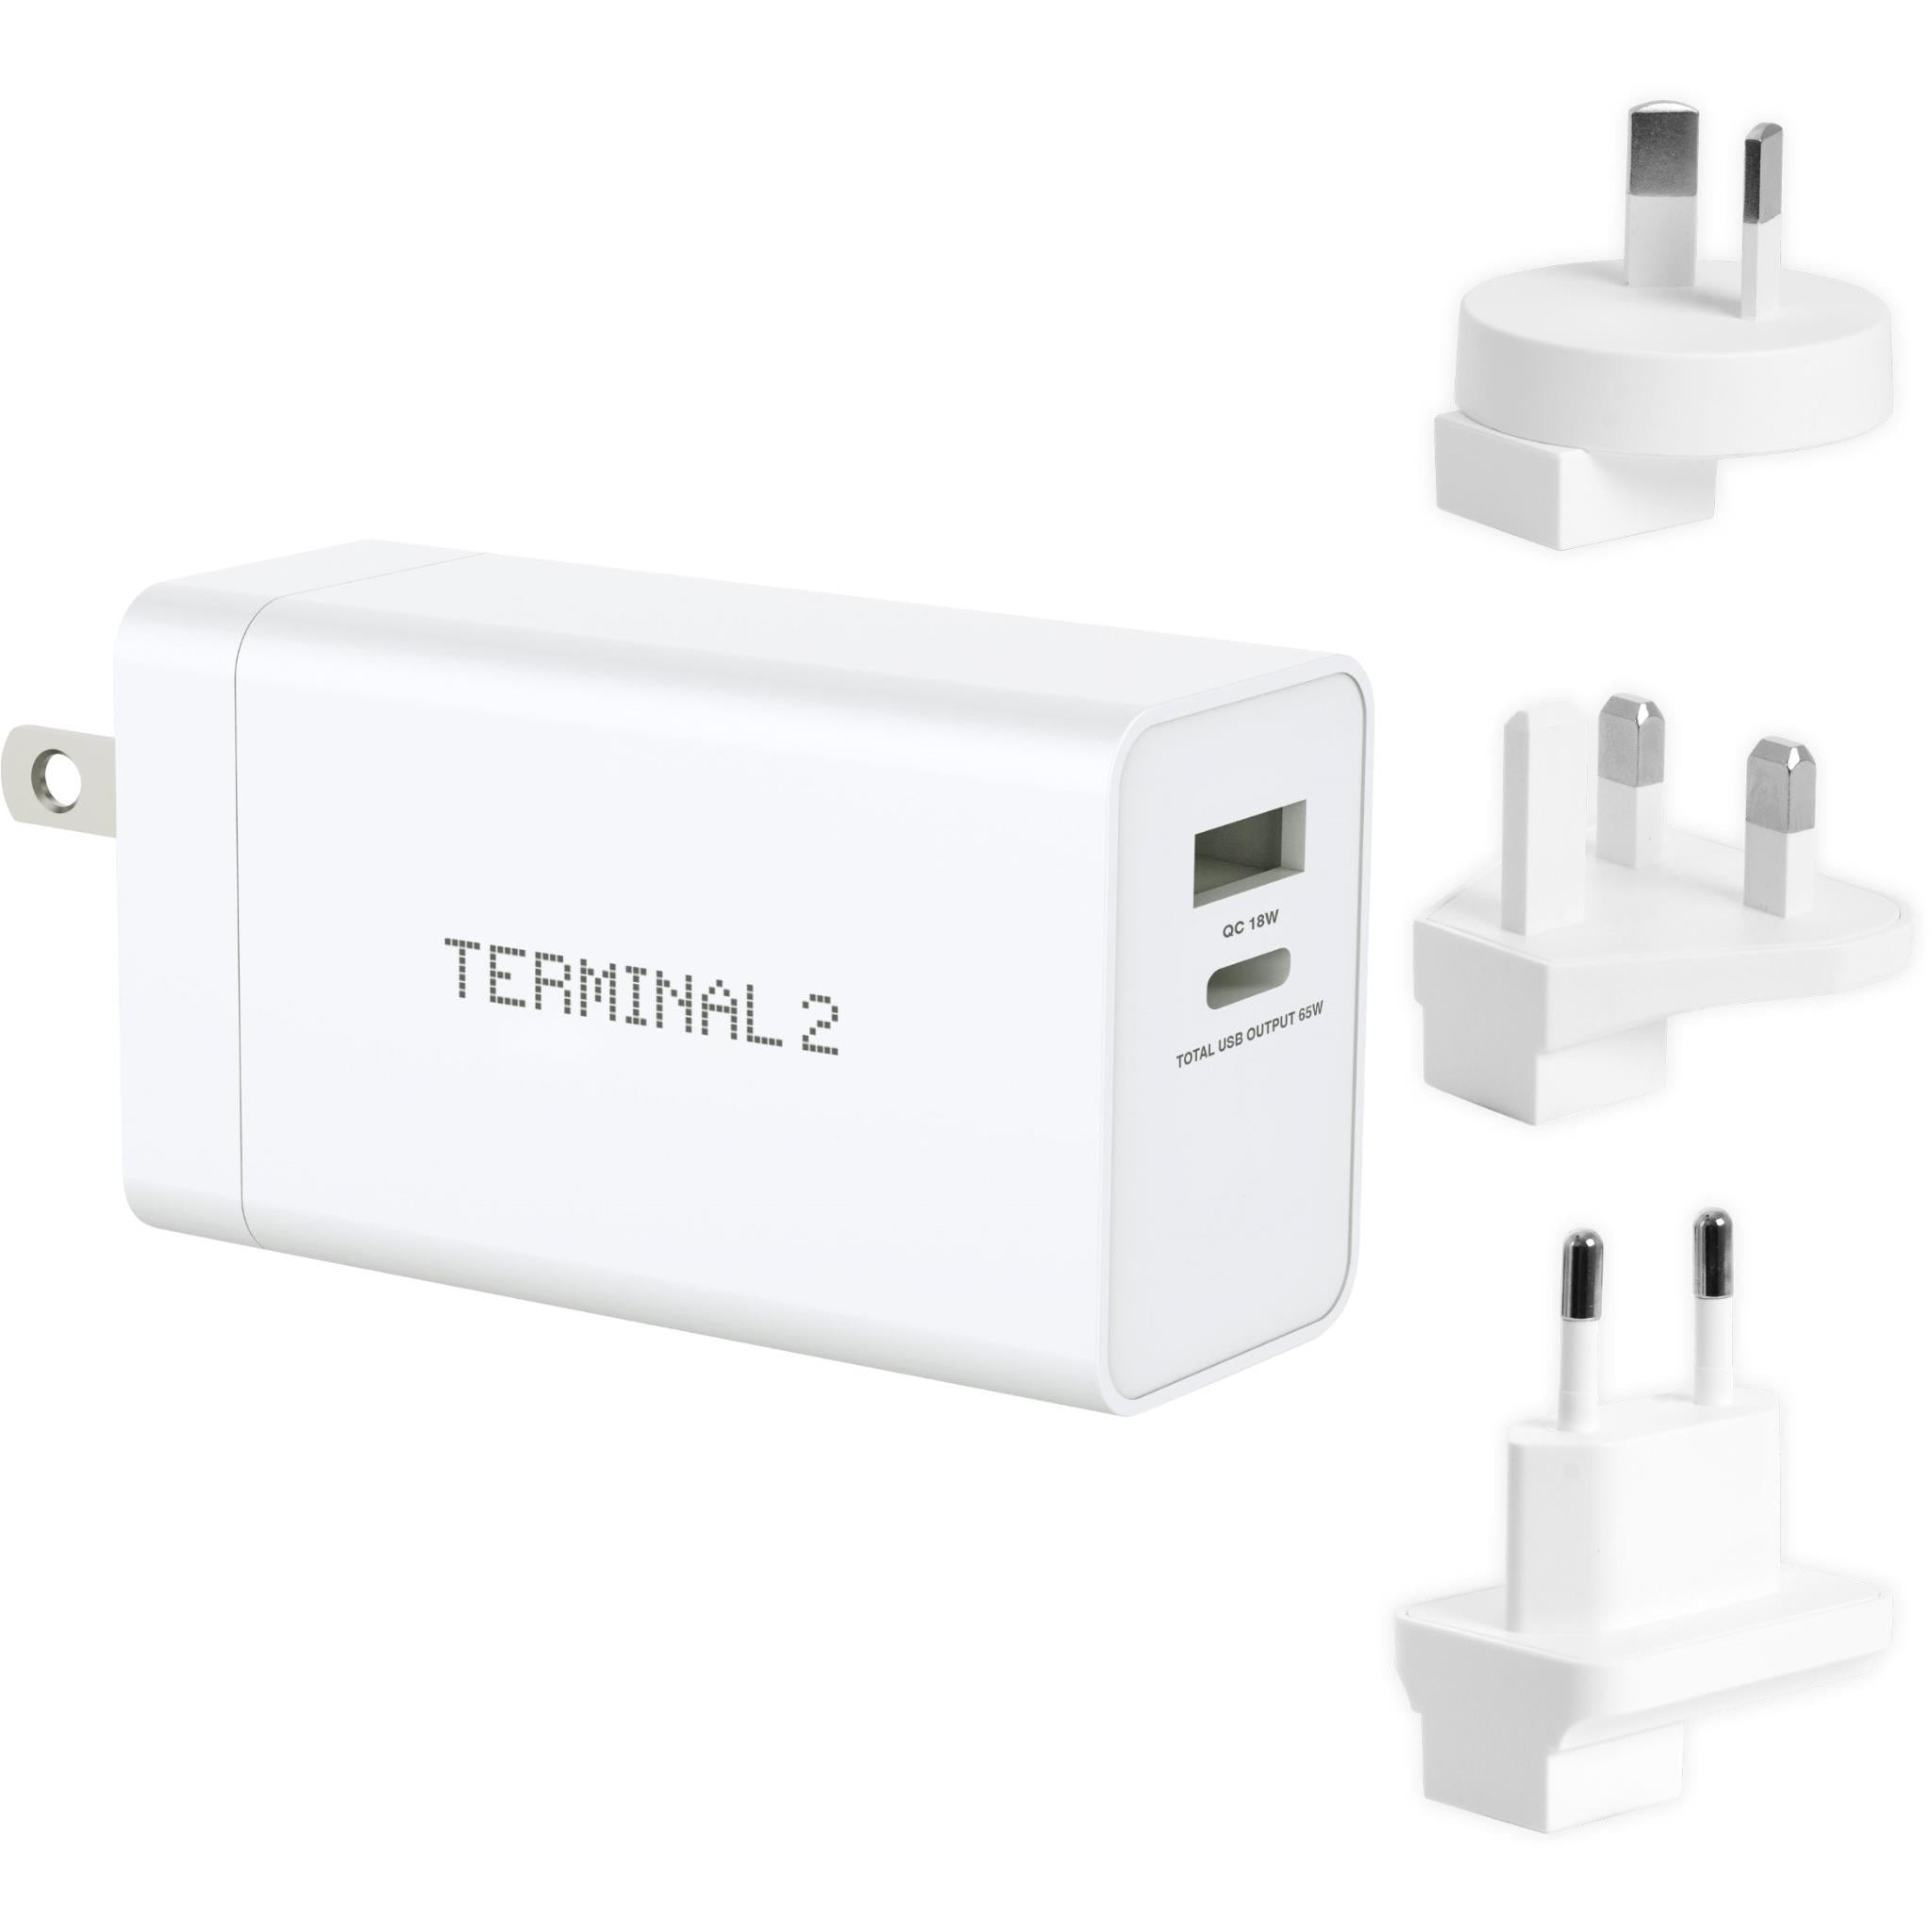 LENCENT Universal Travel Adapter, International Charger with 3 USB Ports  and Type-C PD Fast Charging Adaptor for iPhone, Samsung, Tablet, Gopro. for